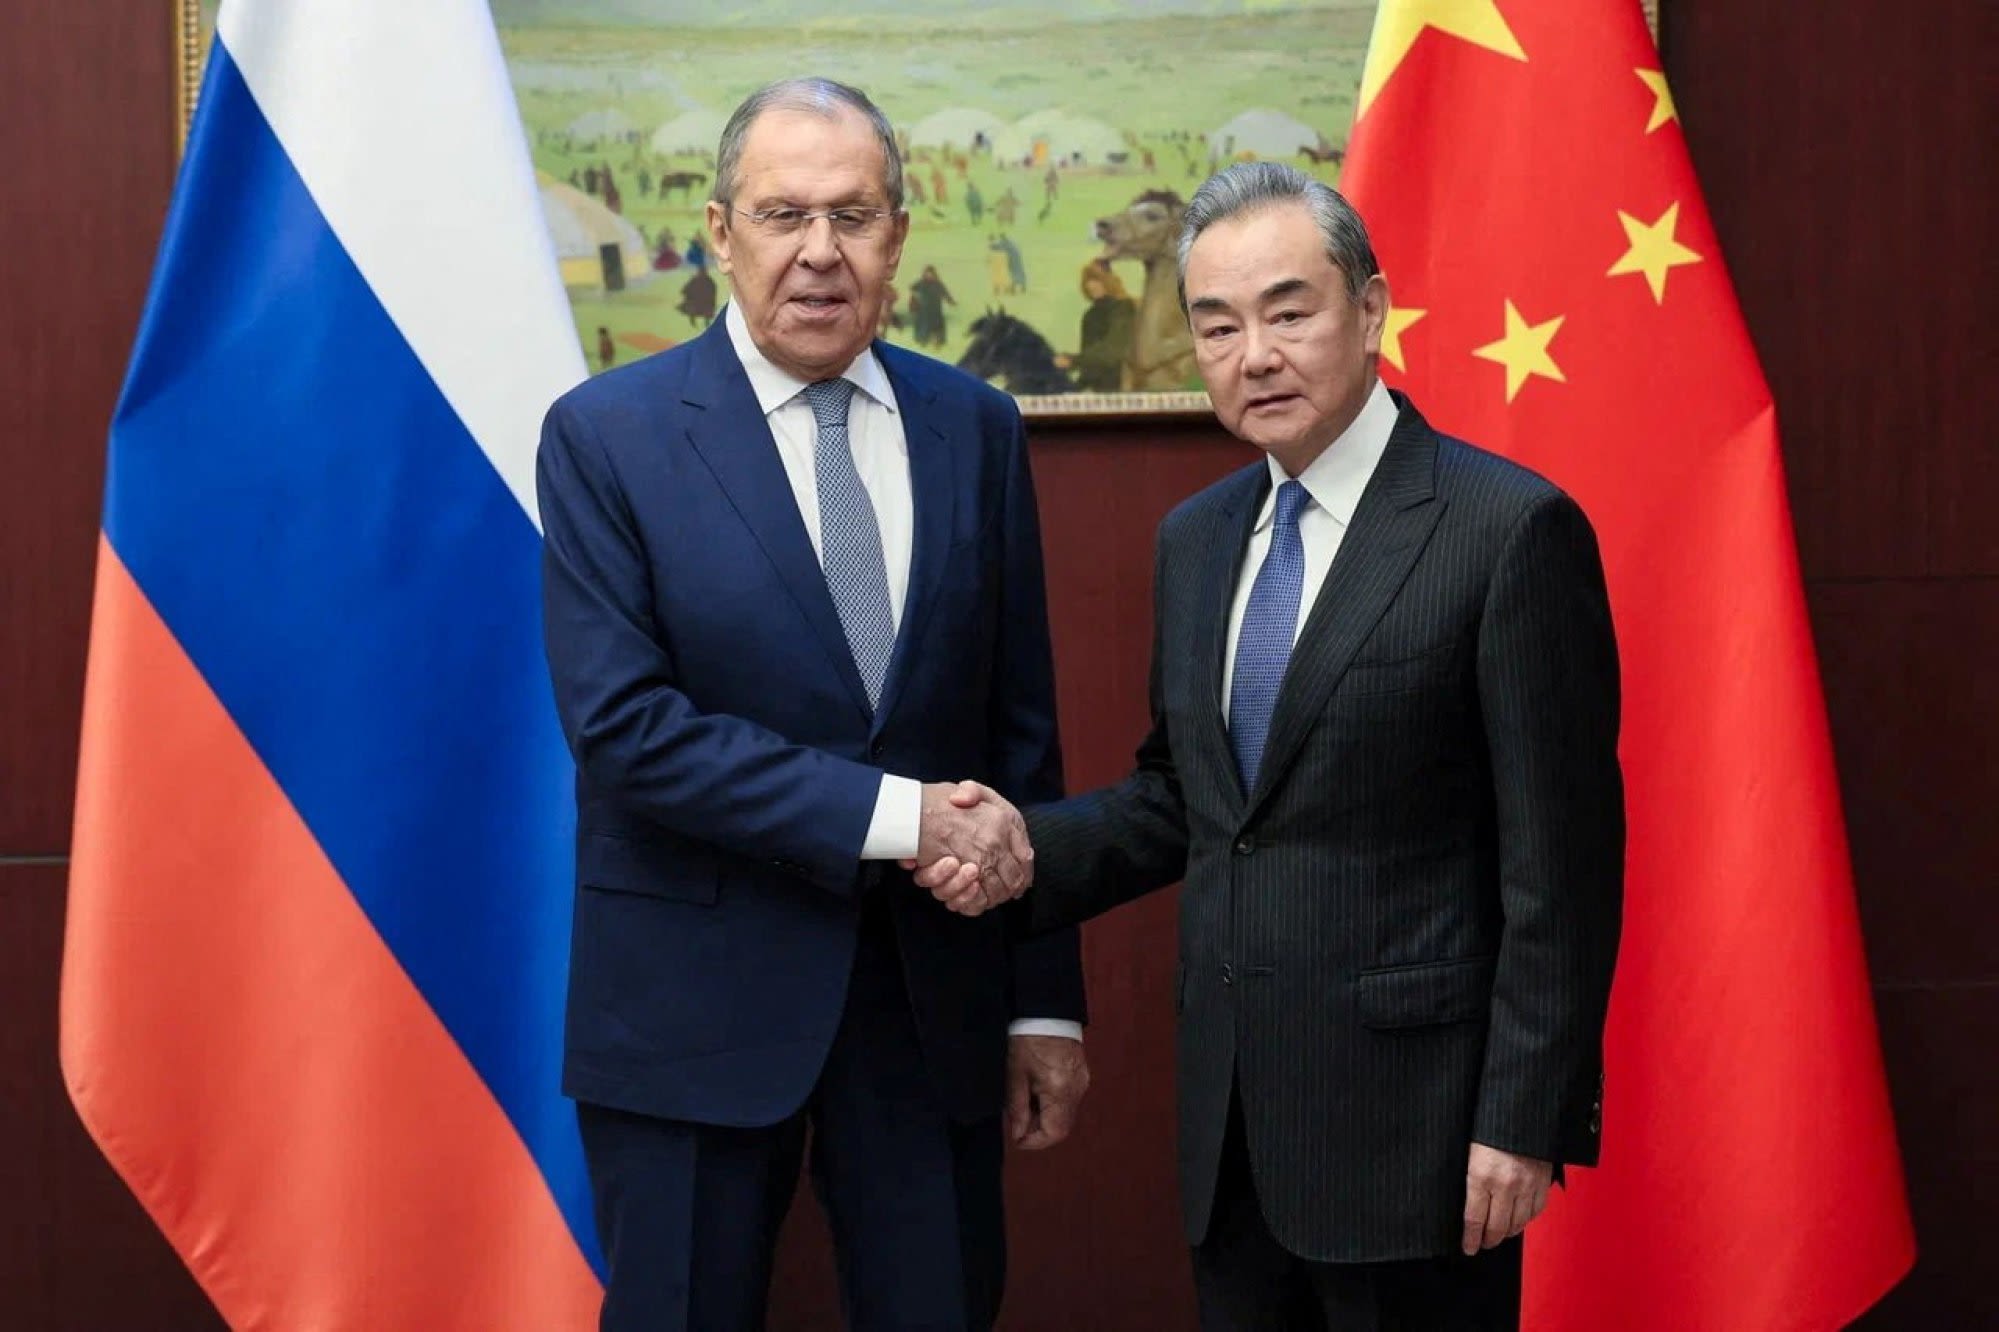 Chinese President Xi Jinping and Russia's Vladimir Putin to meet again in July to build on Beijing visit: Lavrov